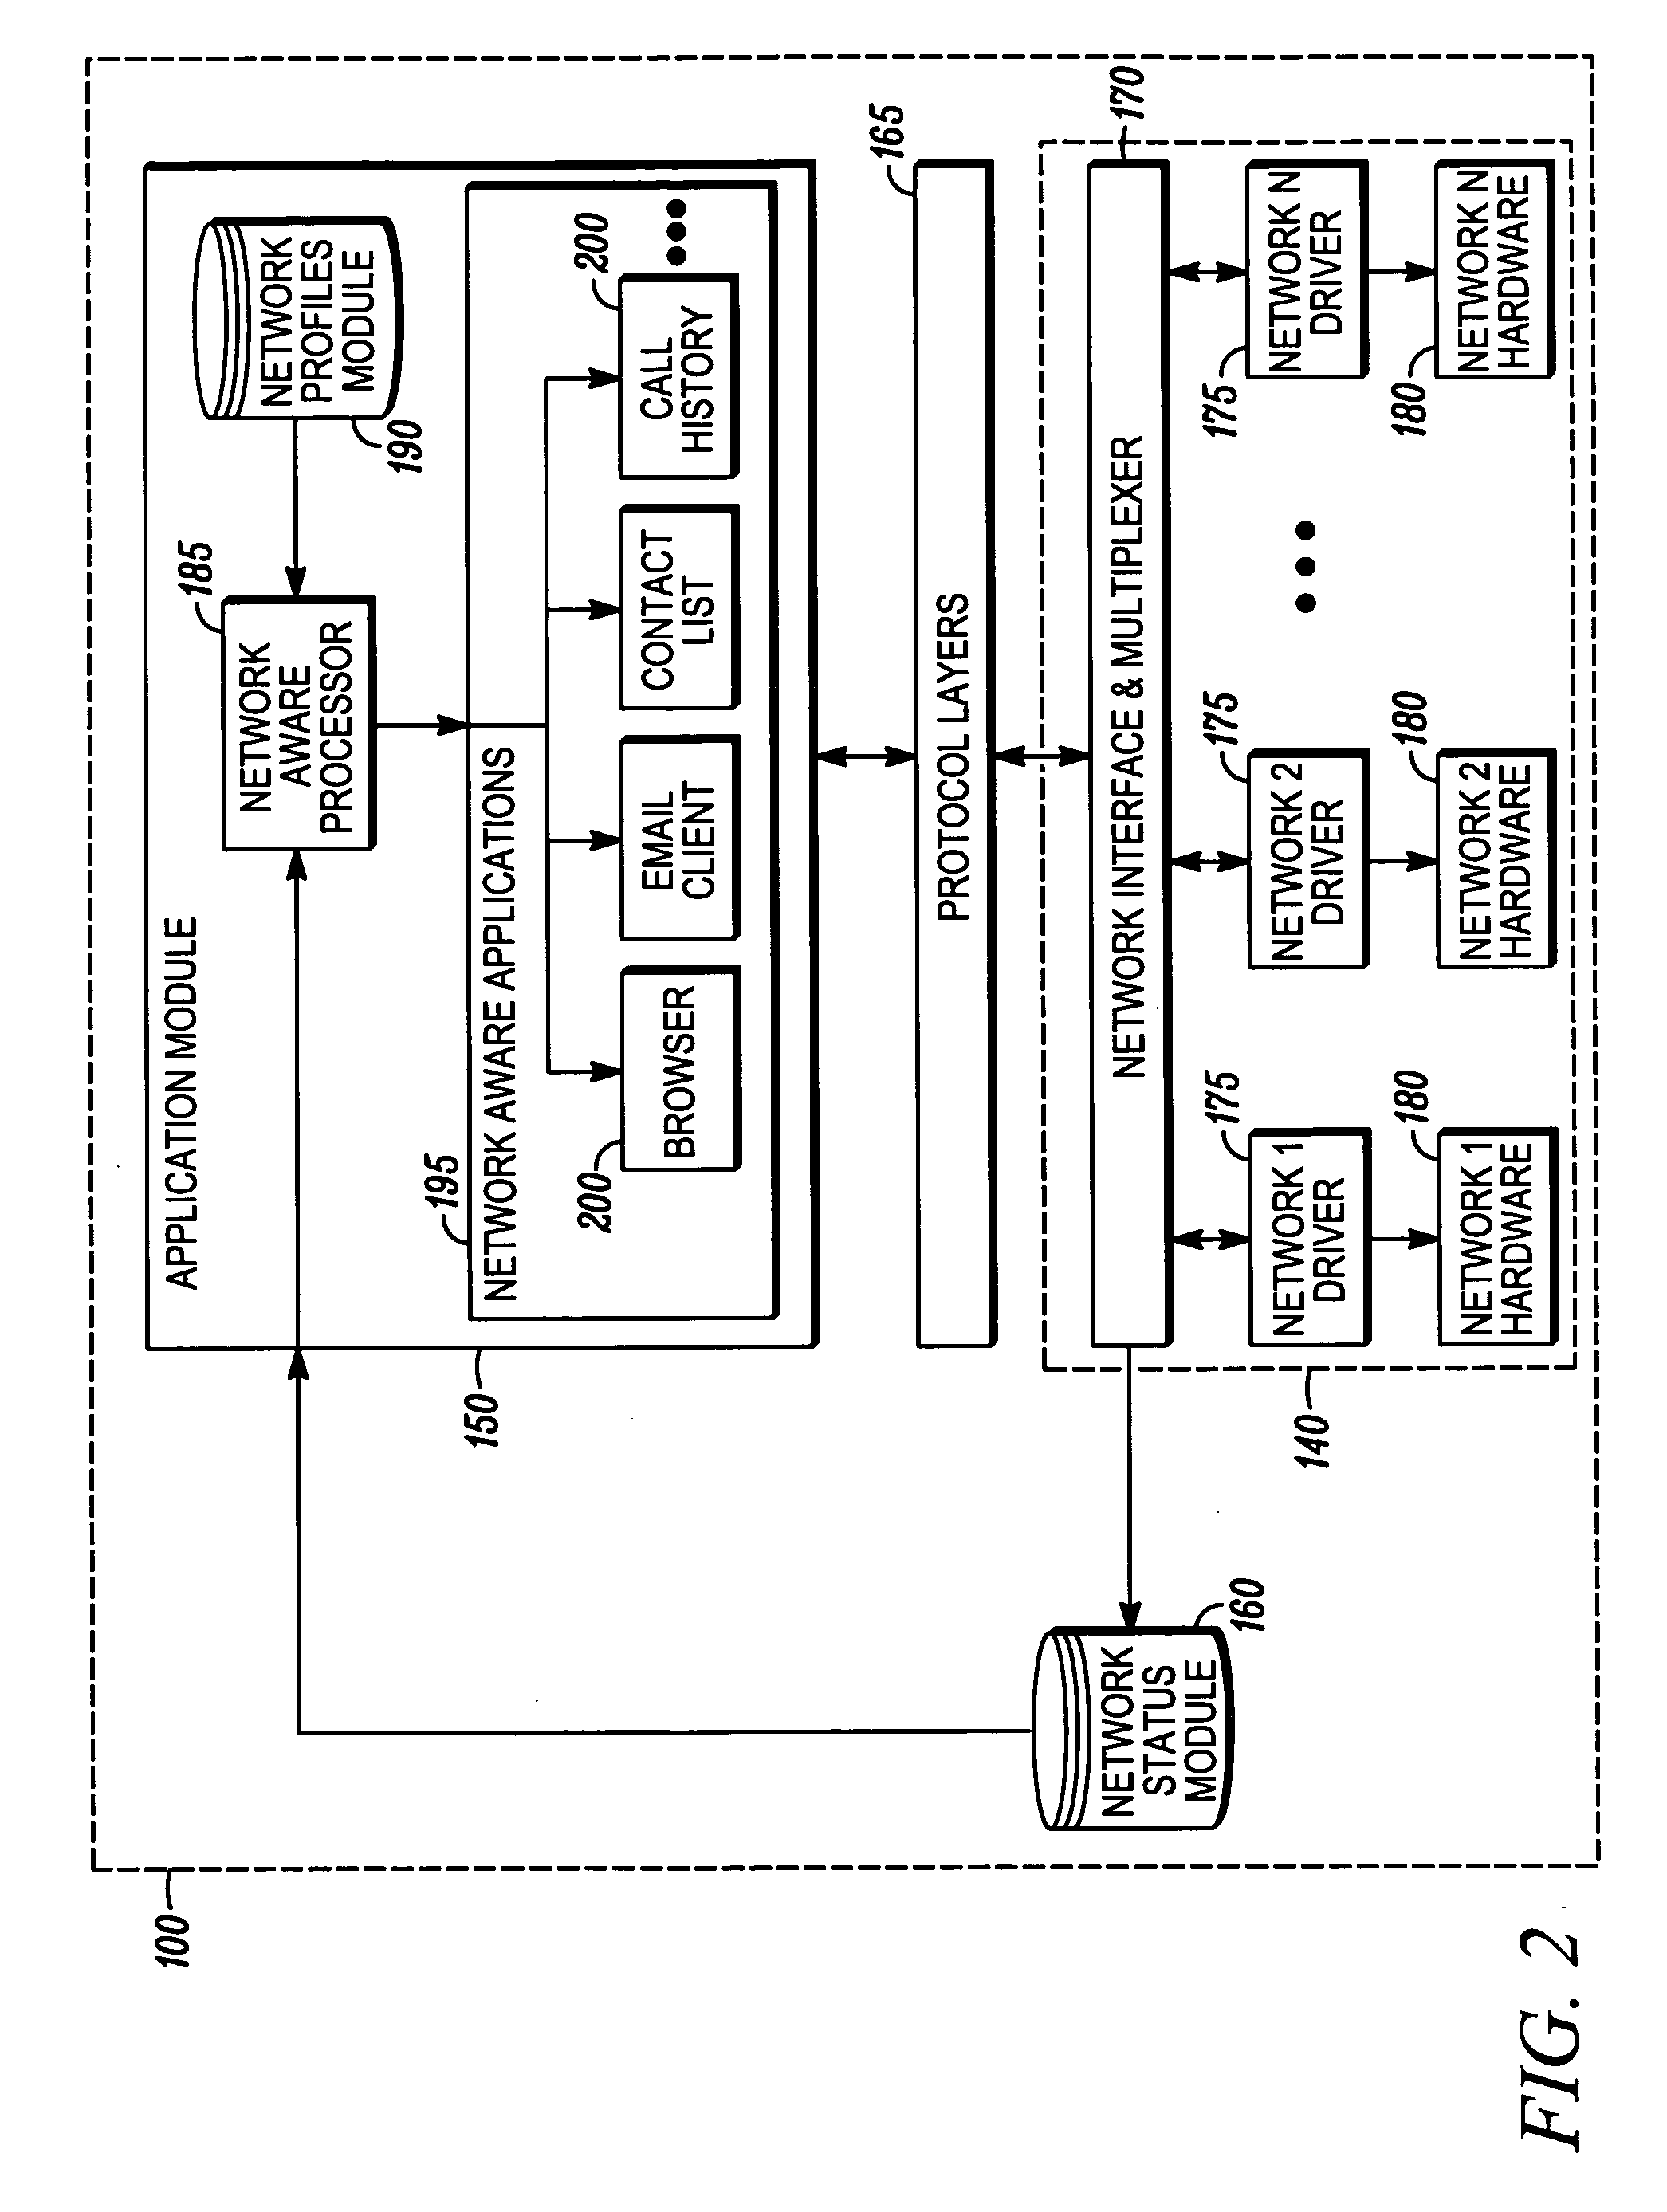 Method and system for network-aware applications